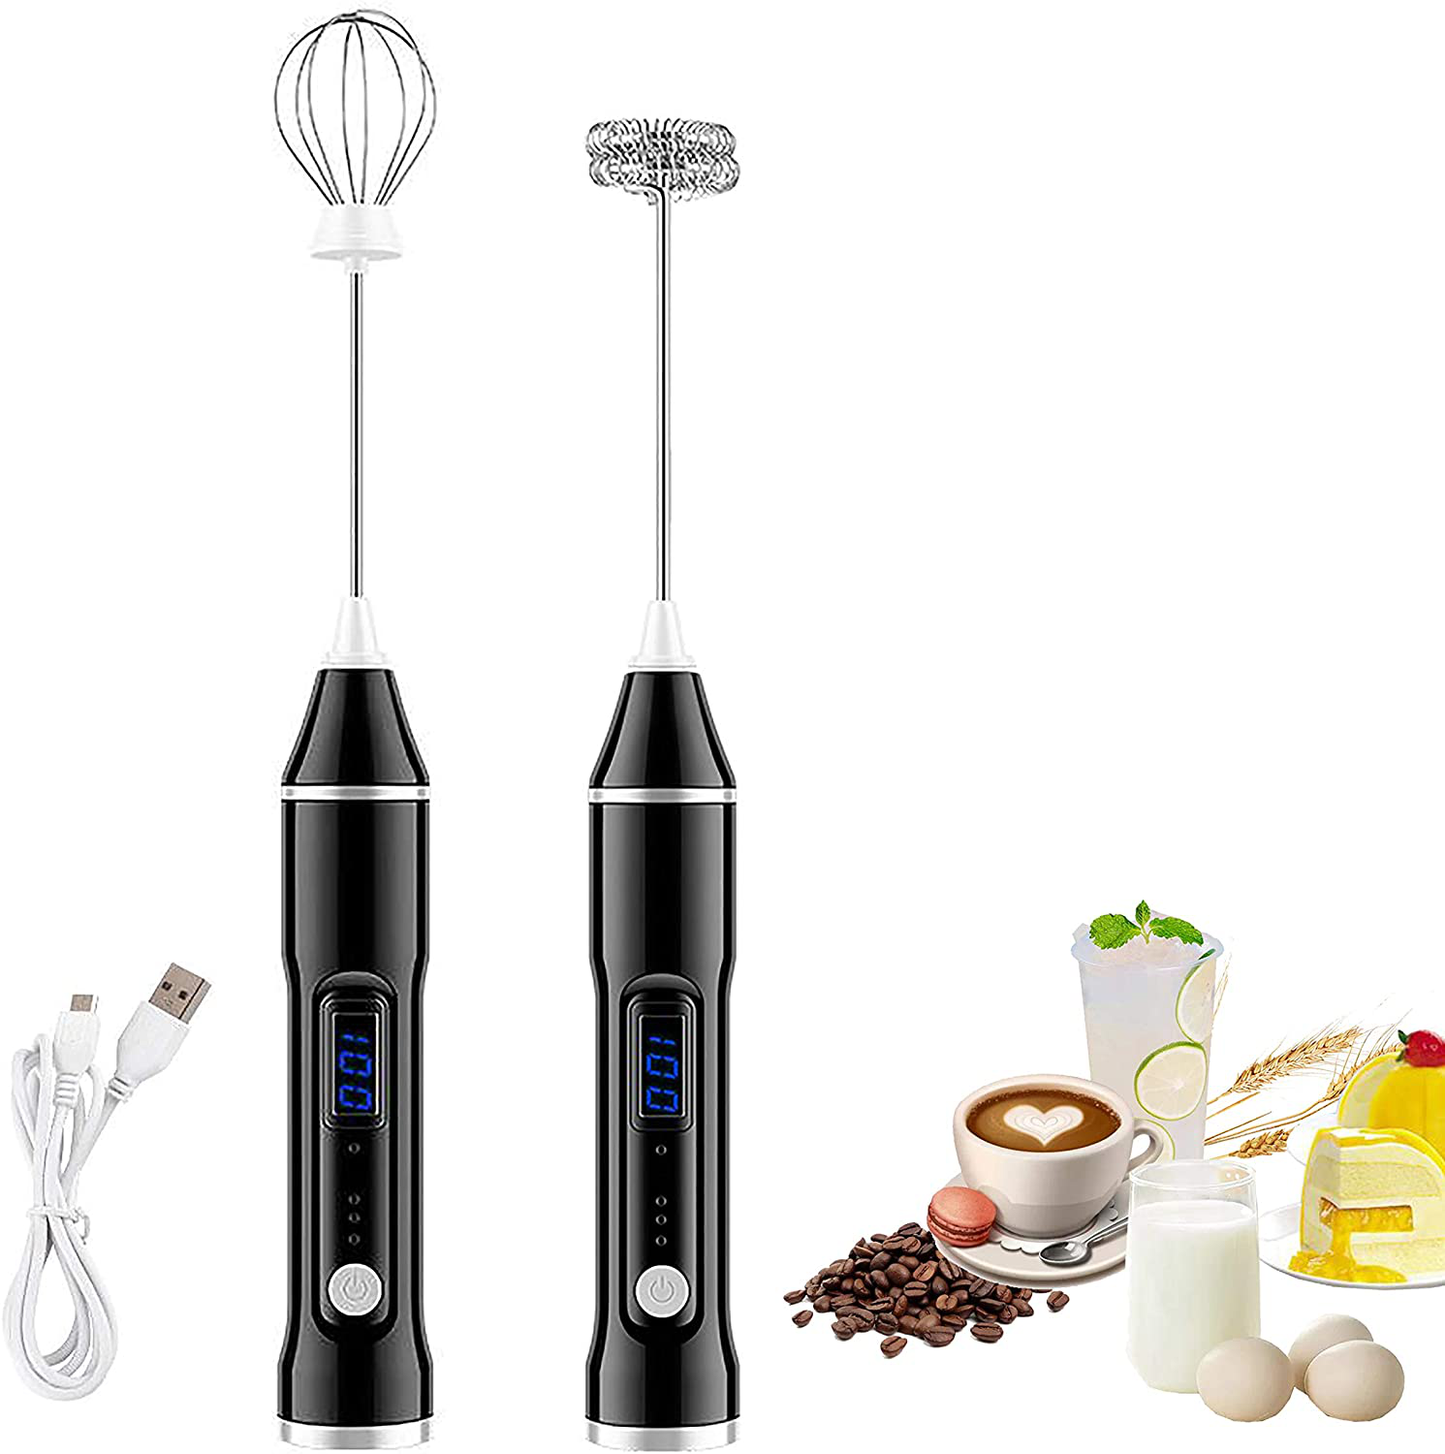 Milk Frother, USB Rechargeable Handheld Electric Foam Maker for Coffee and Baking, 3 Speeds Mini Milk Foamer Drink Mixer Cream Blender with 2 Whisks for Coffee Protein Powder Matcha Black